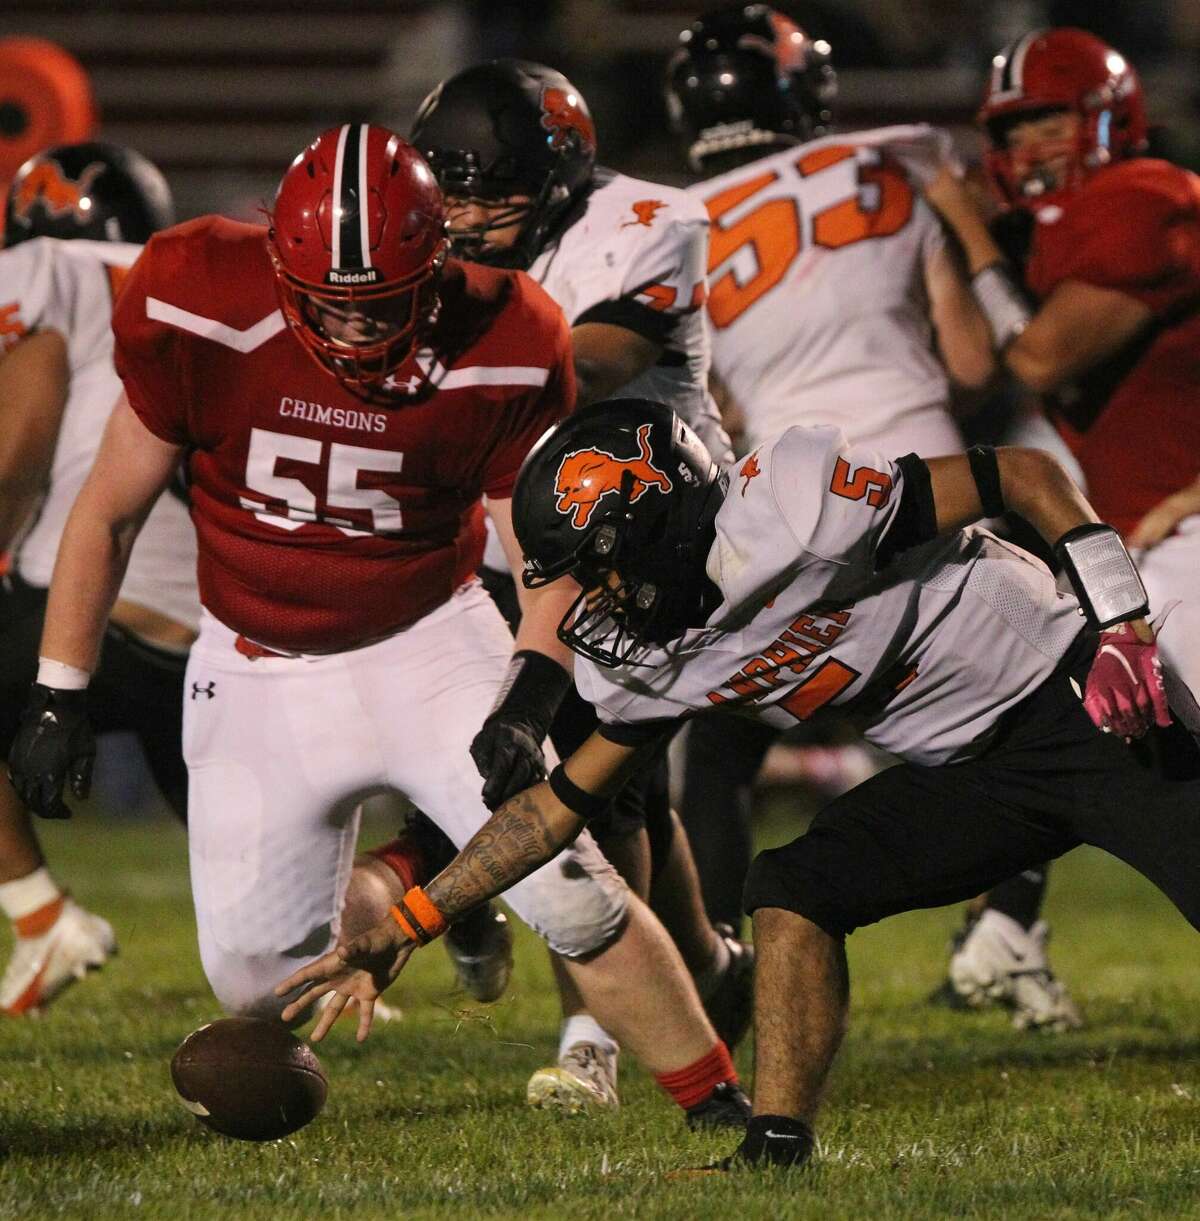 A Lanphier player reaches for a loose ball as Jacksonville's Ryan McCombs closes in during the second half of a football game at Jacksonville Friday night.